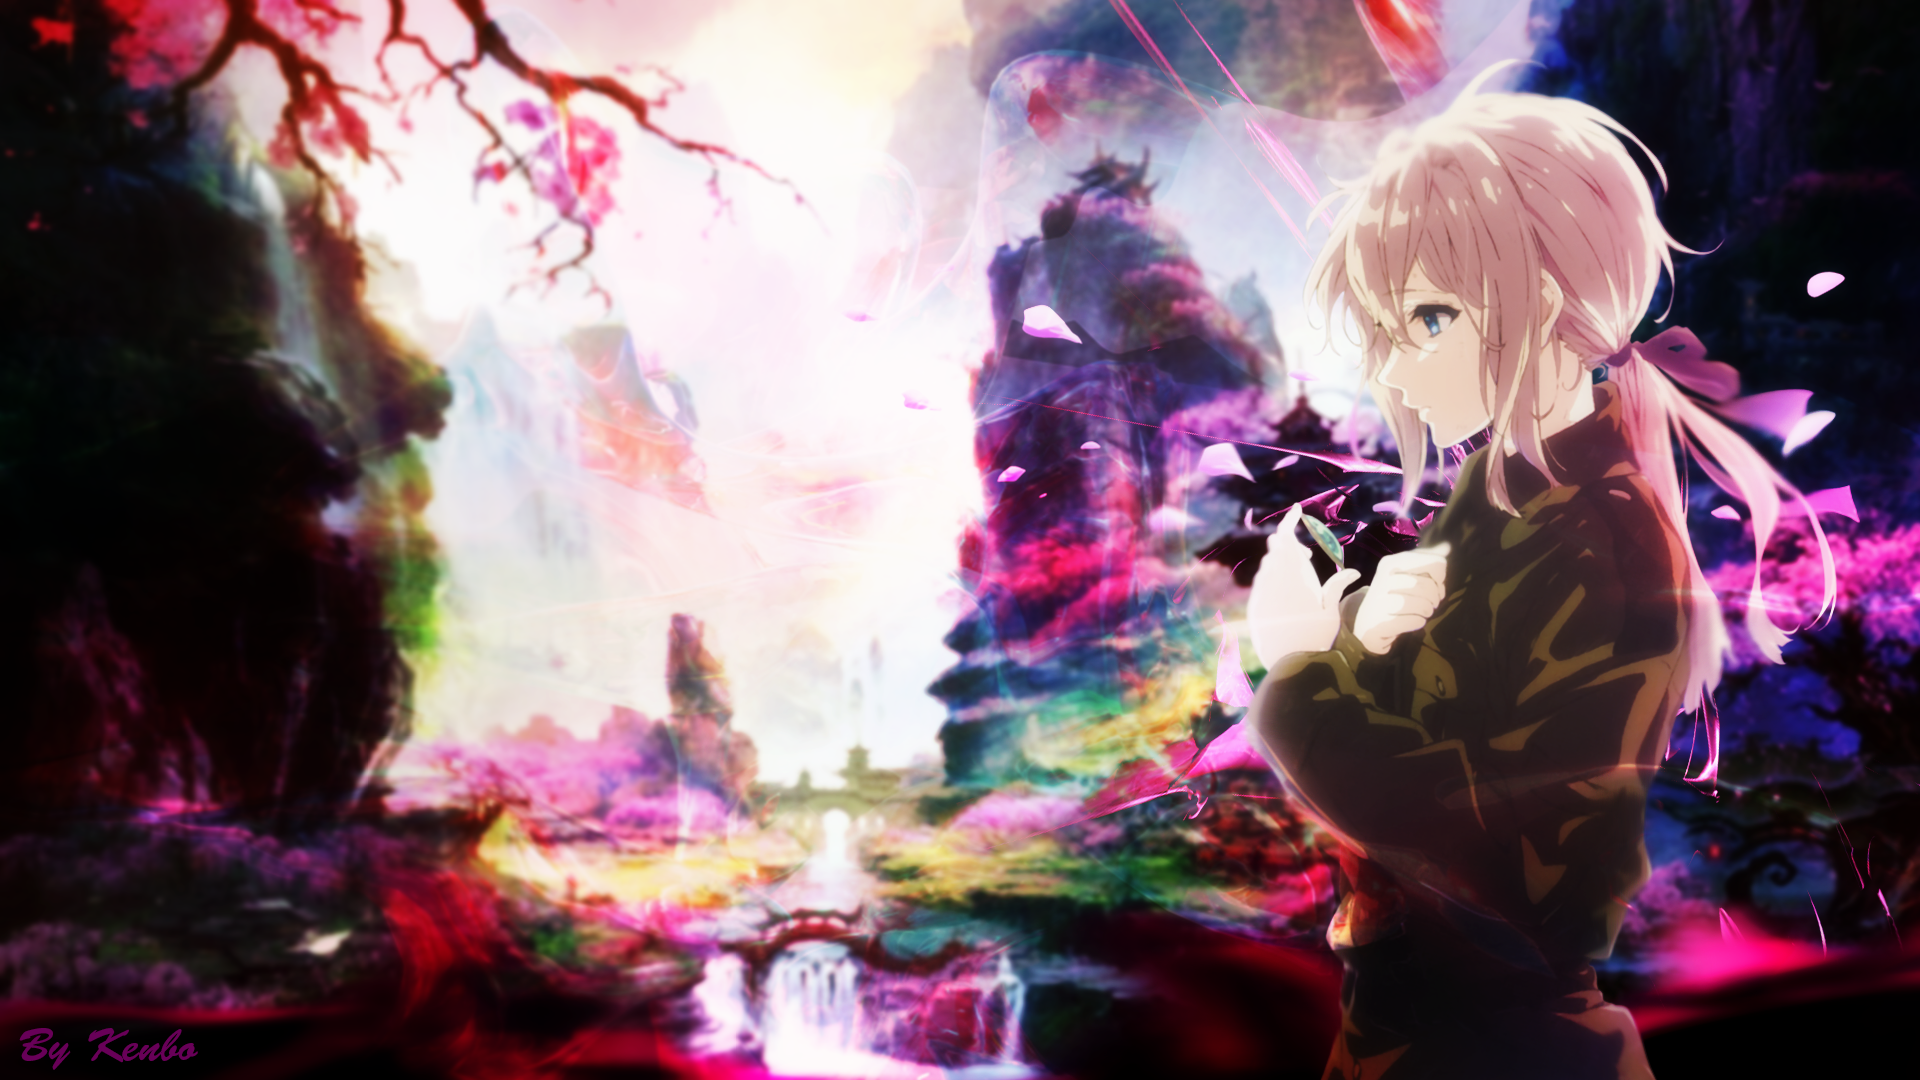 Anime 1920x1080 Violet Evergarden anime anime girls picture-in-picture